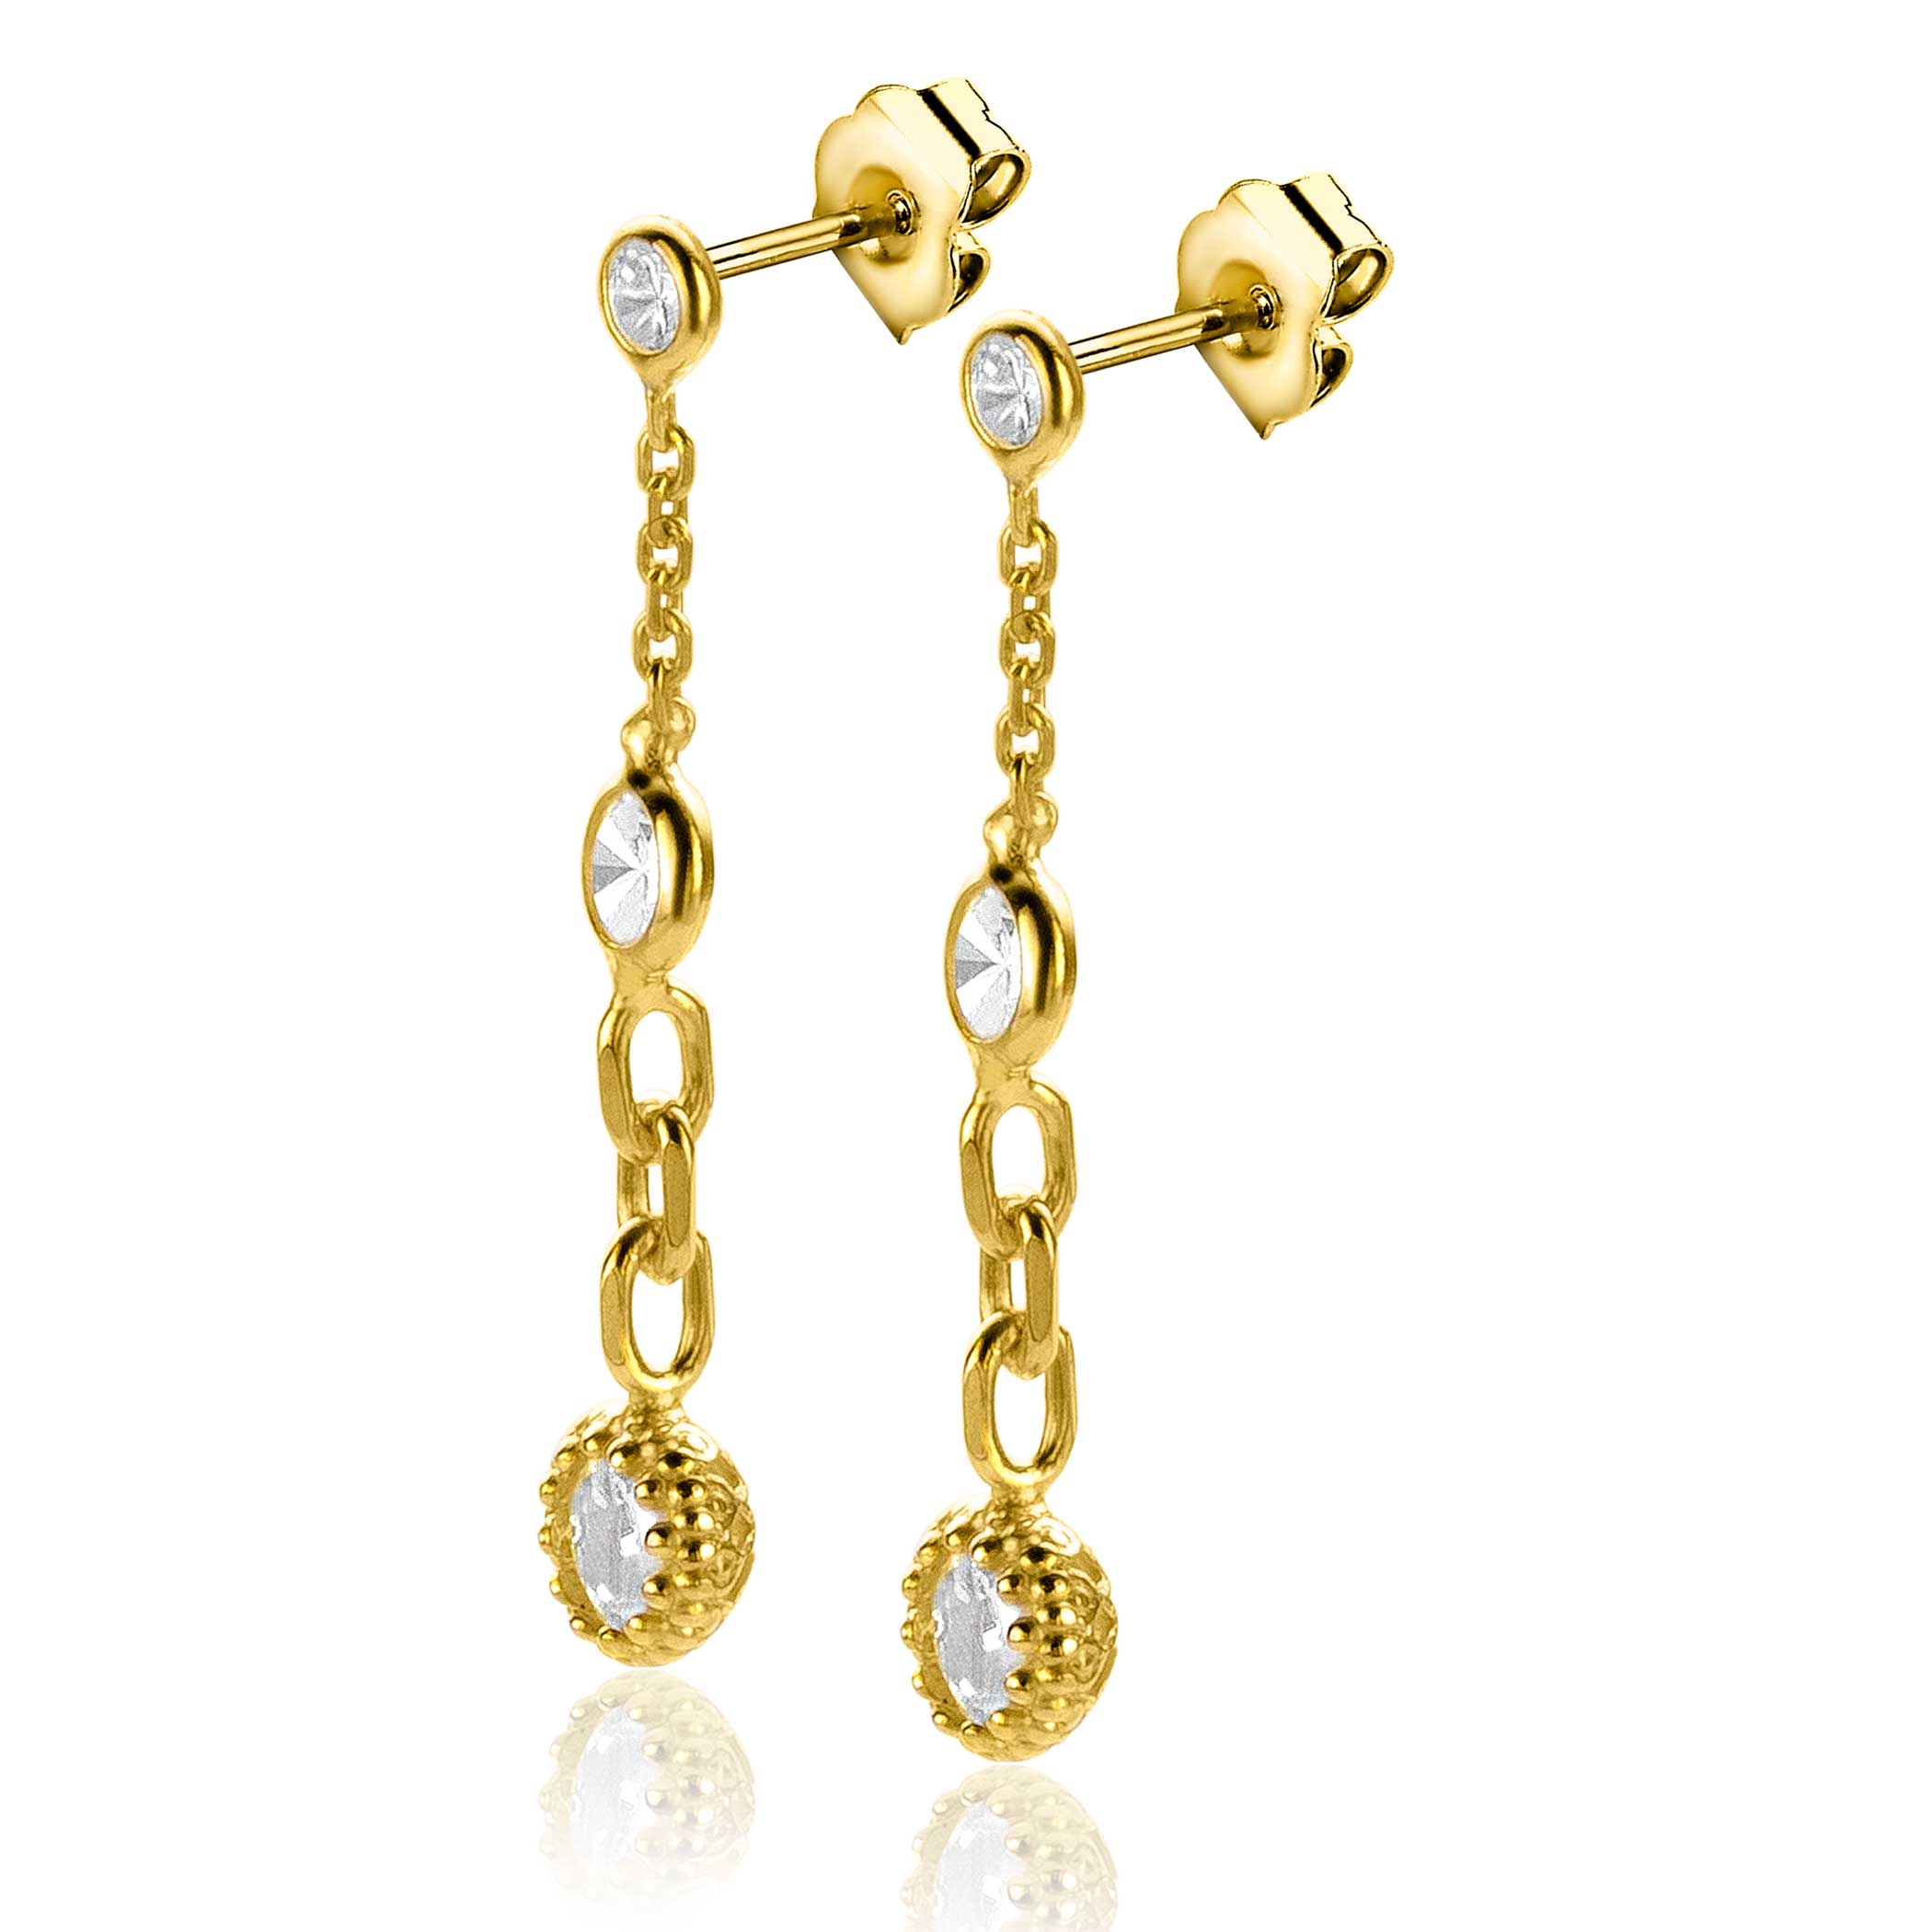 30mm ZINZI Gold Plated Sterling Silver Earrings Chains White Round Zirconias ZIO2265G